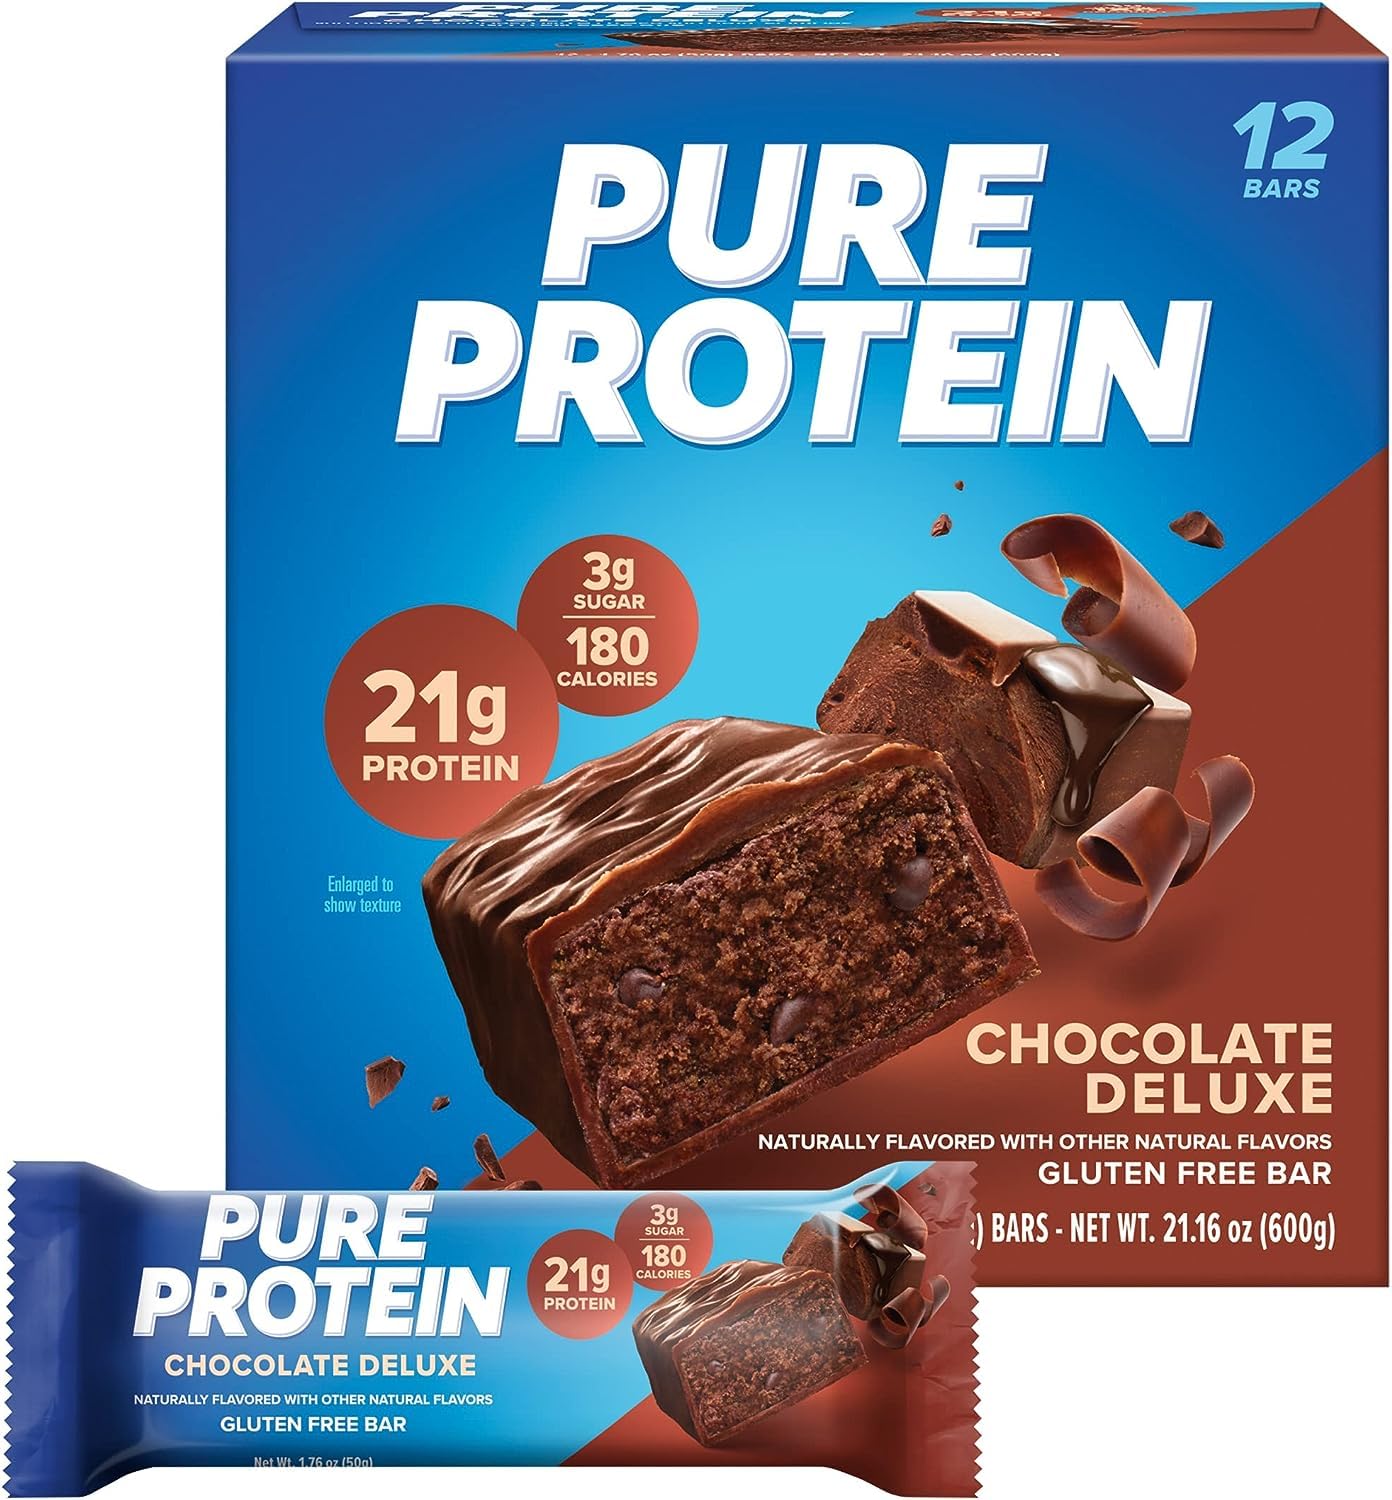 Pure Protein High Protein, Nutritious Snacks Bars, 1.76oz, Pack of 12